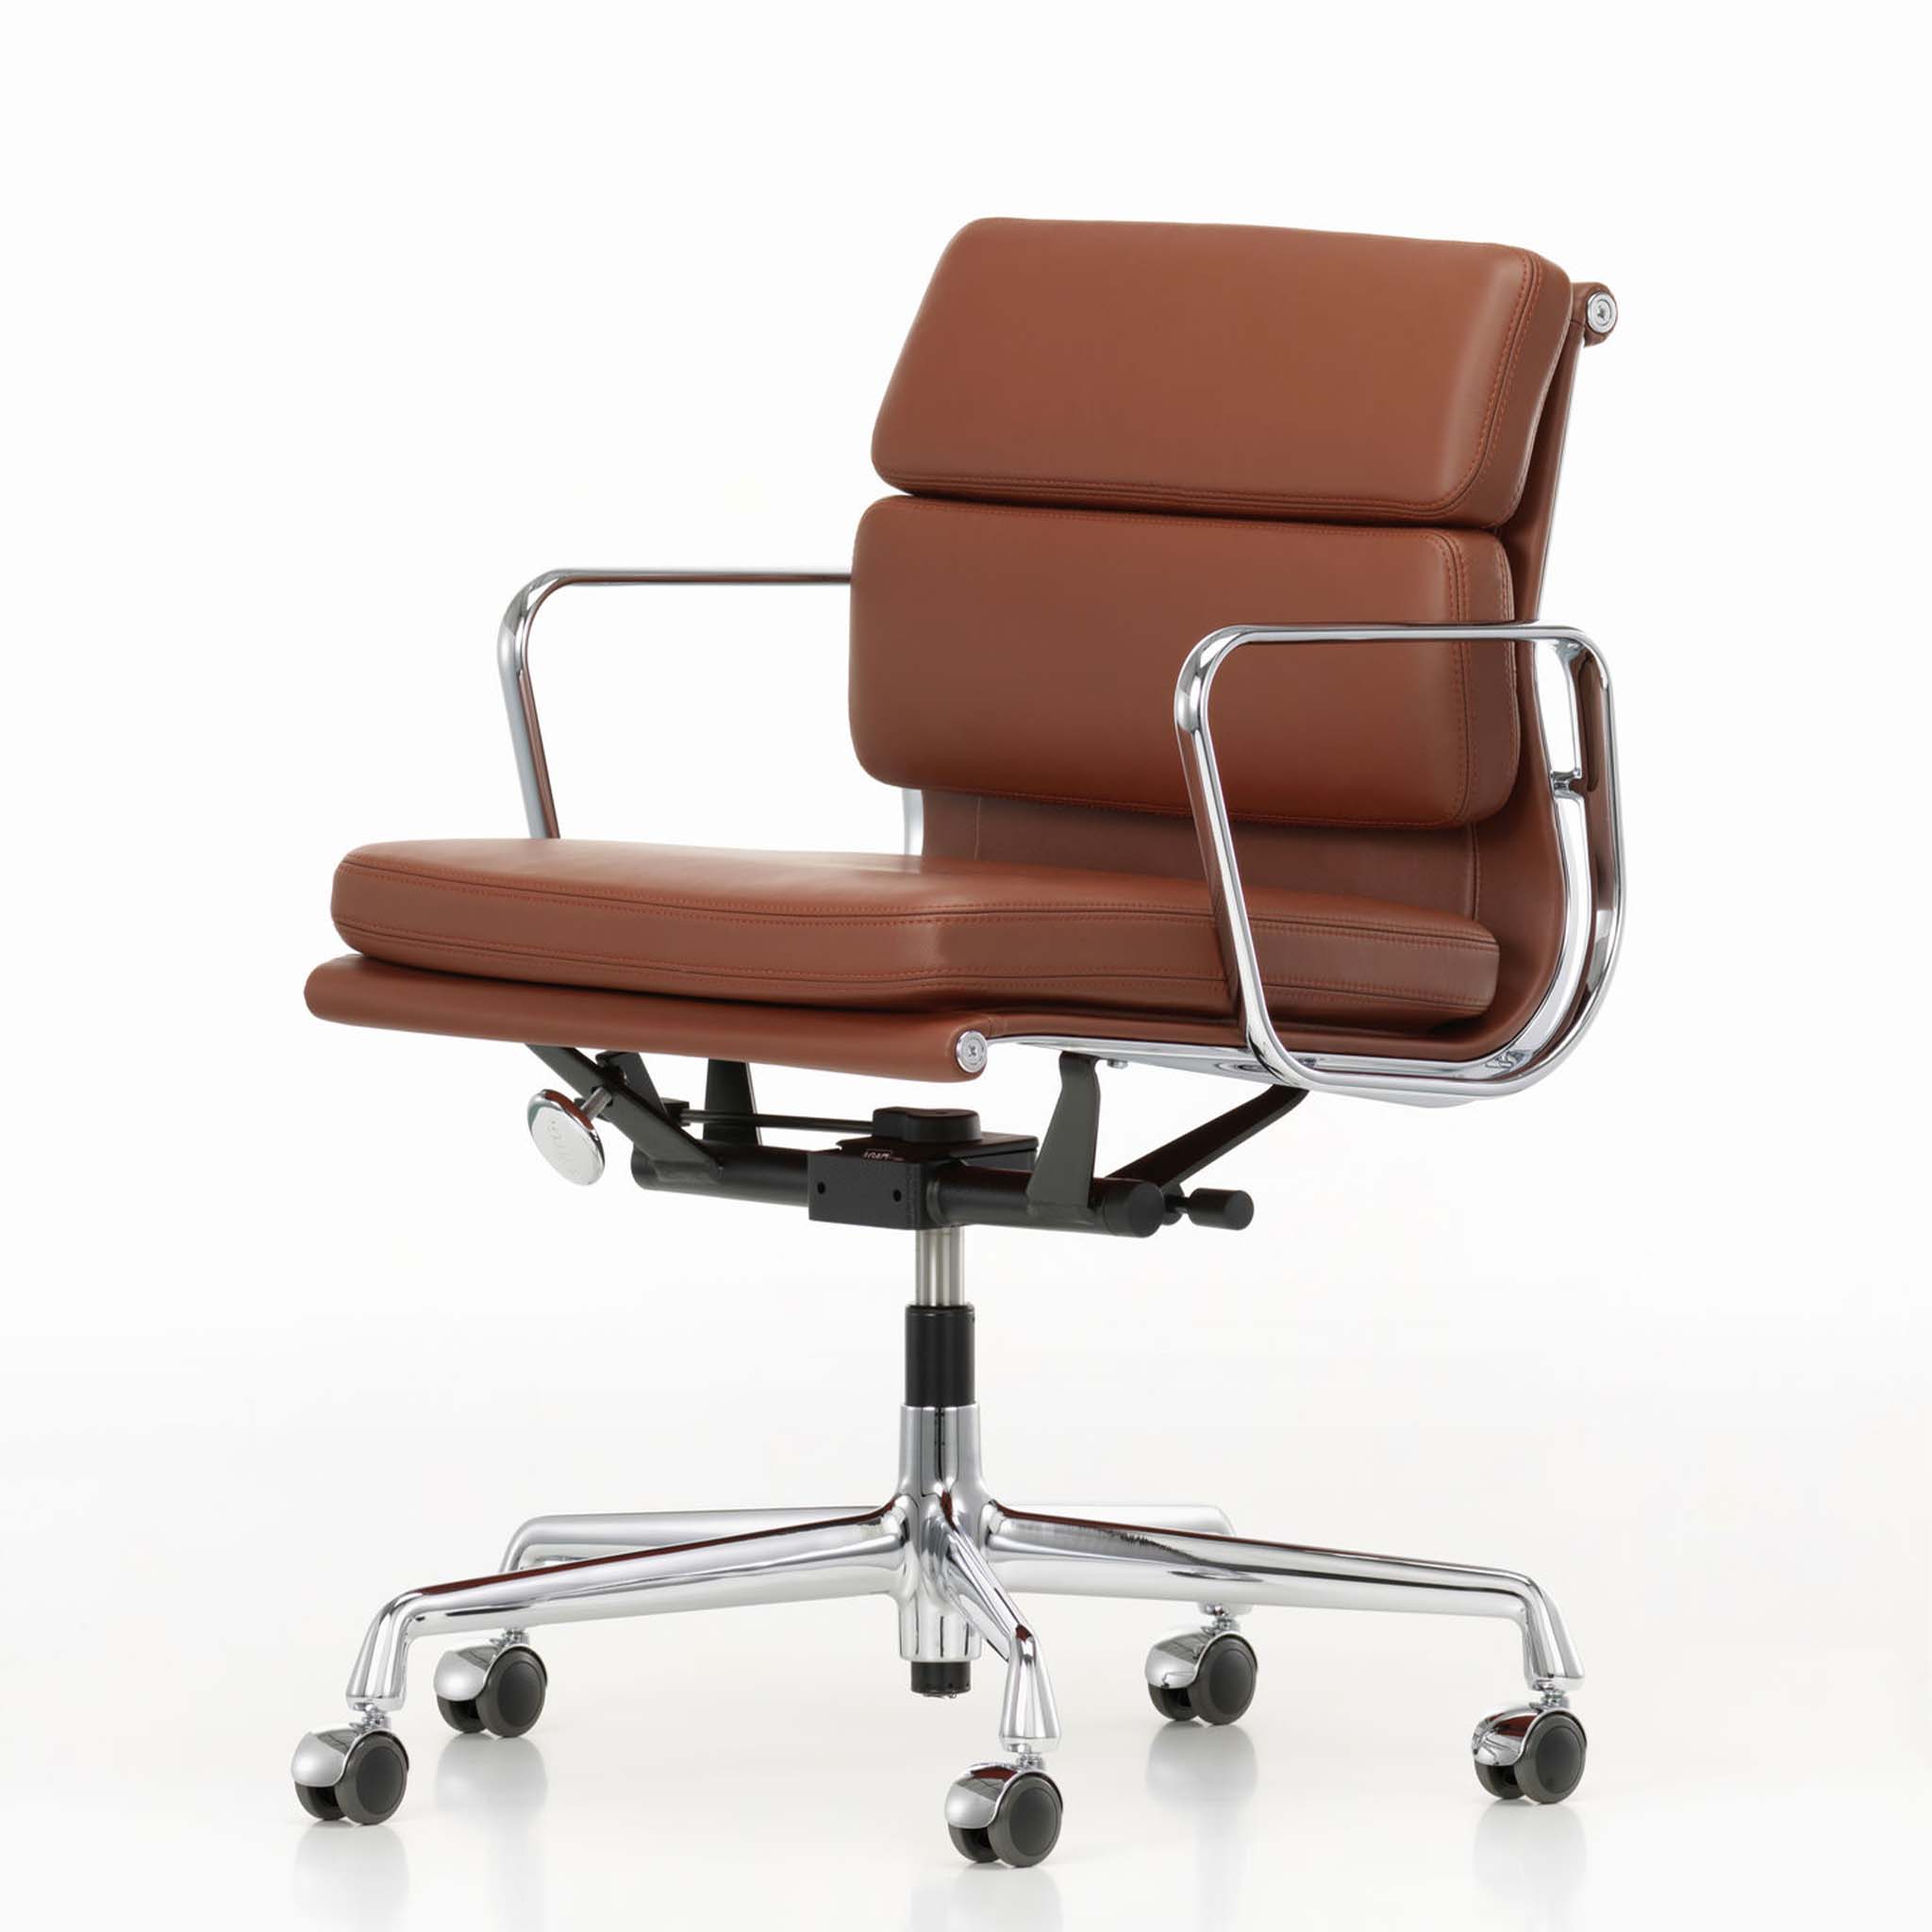 EA 217 Soft Pad chair by Vitra